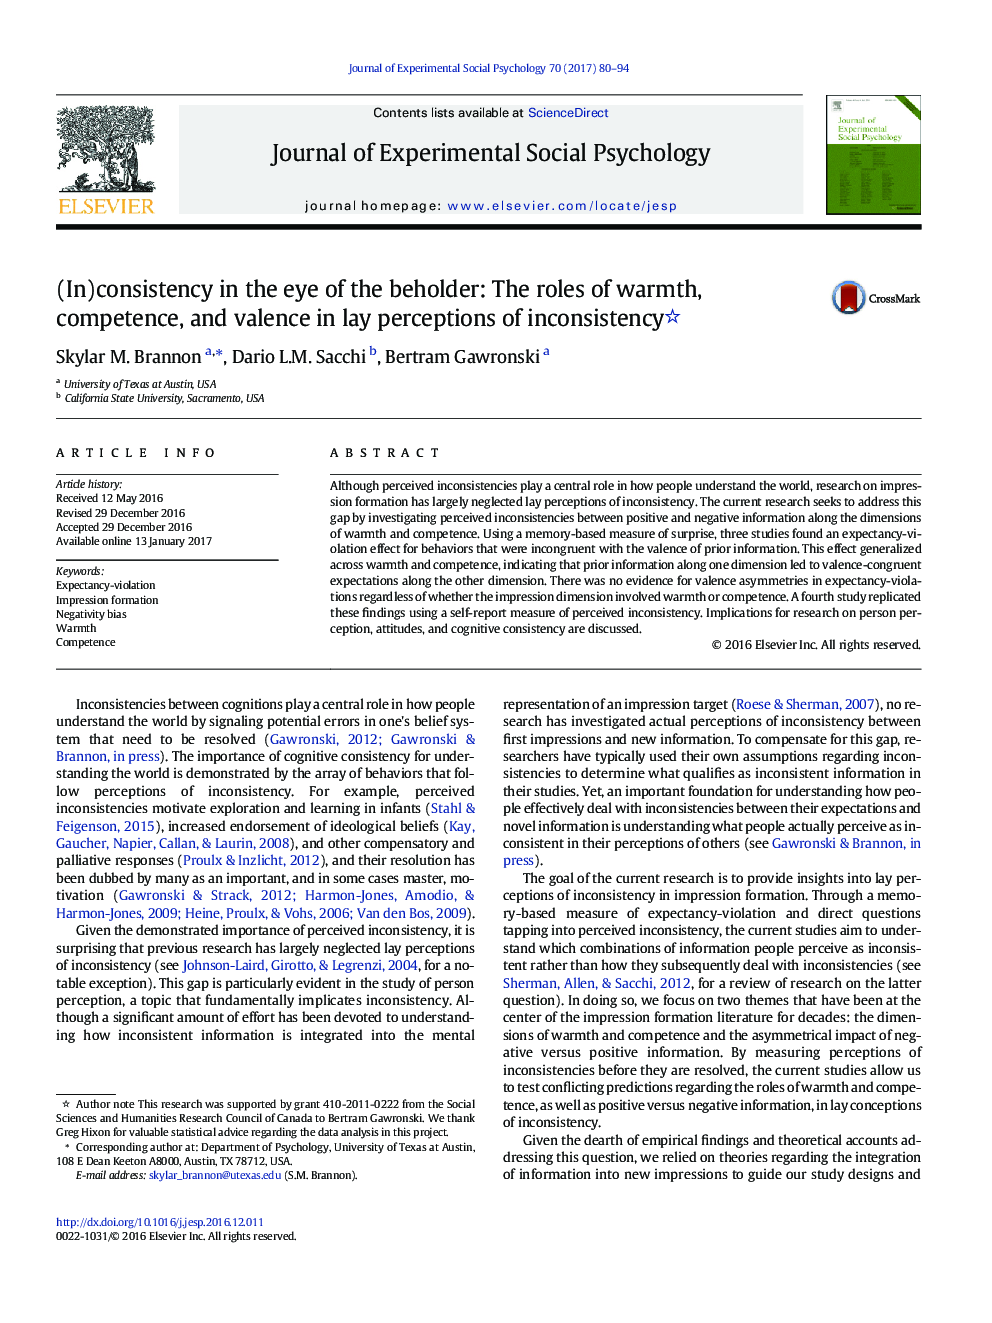 (In)consistency in the eye of the beholder: The roles of warmth, competence, and valence in lay perceptions of inconsistency